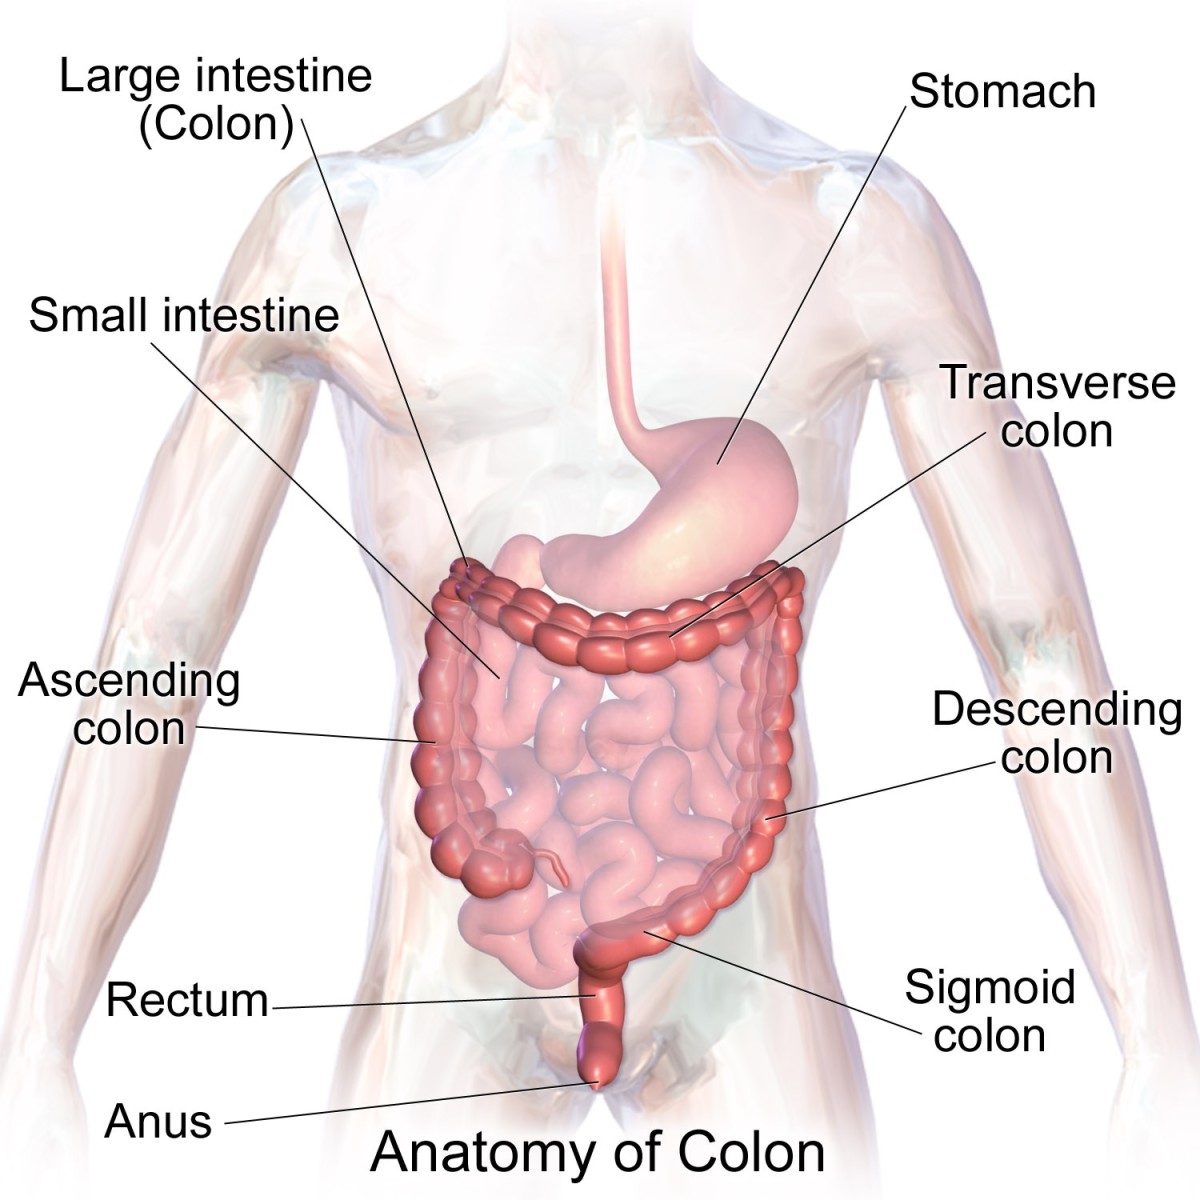 The greatest number of bacteria in our body live in our large intestine, or colon.